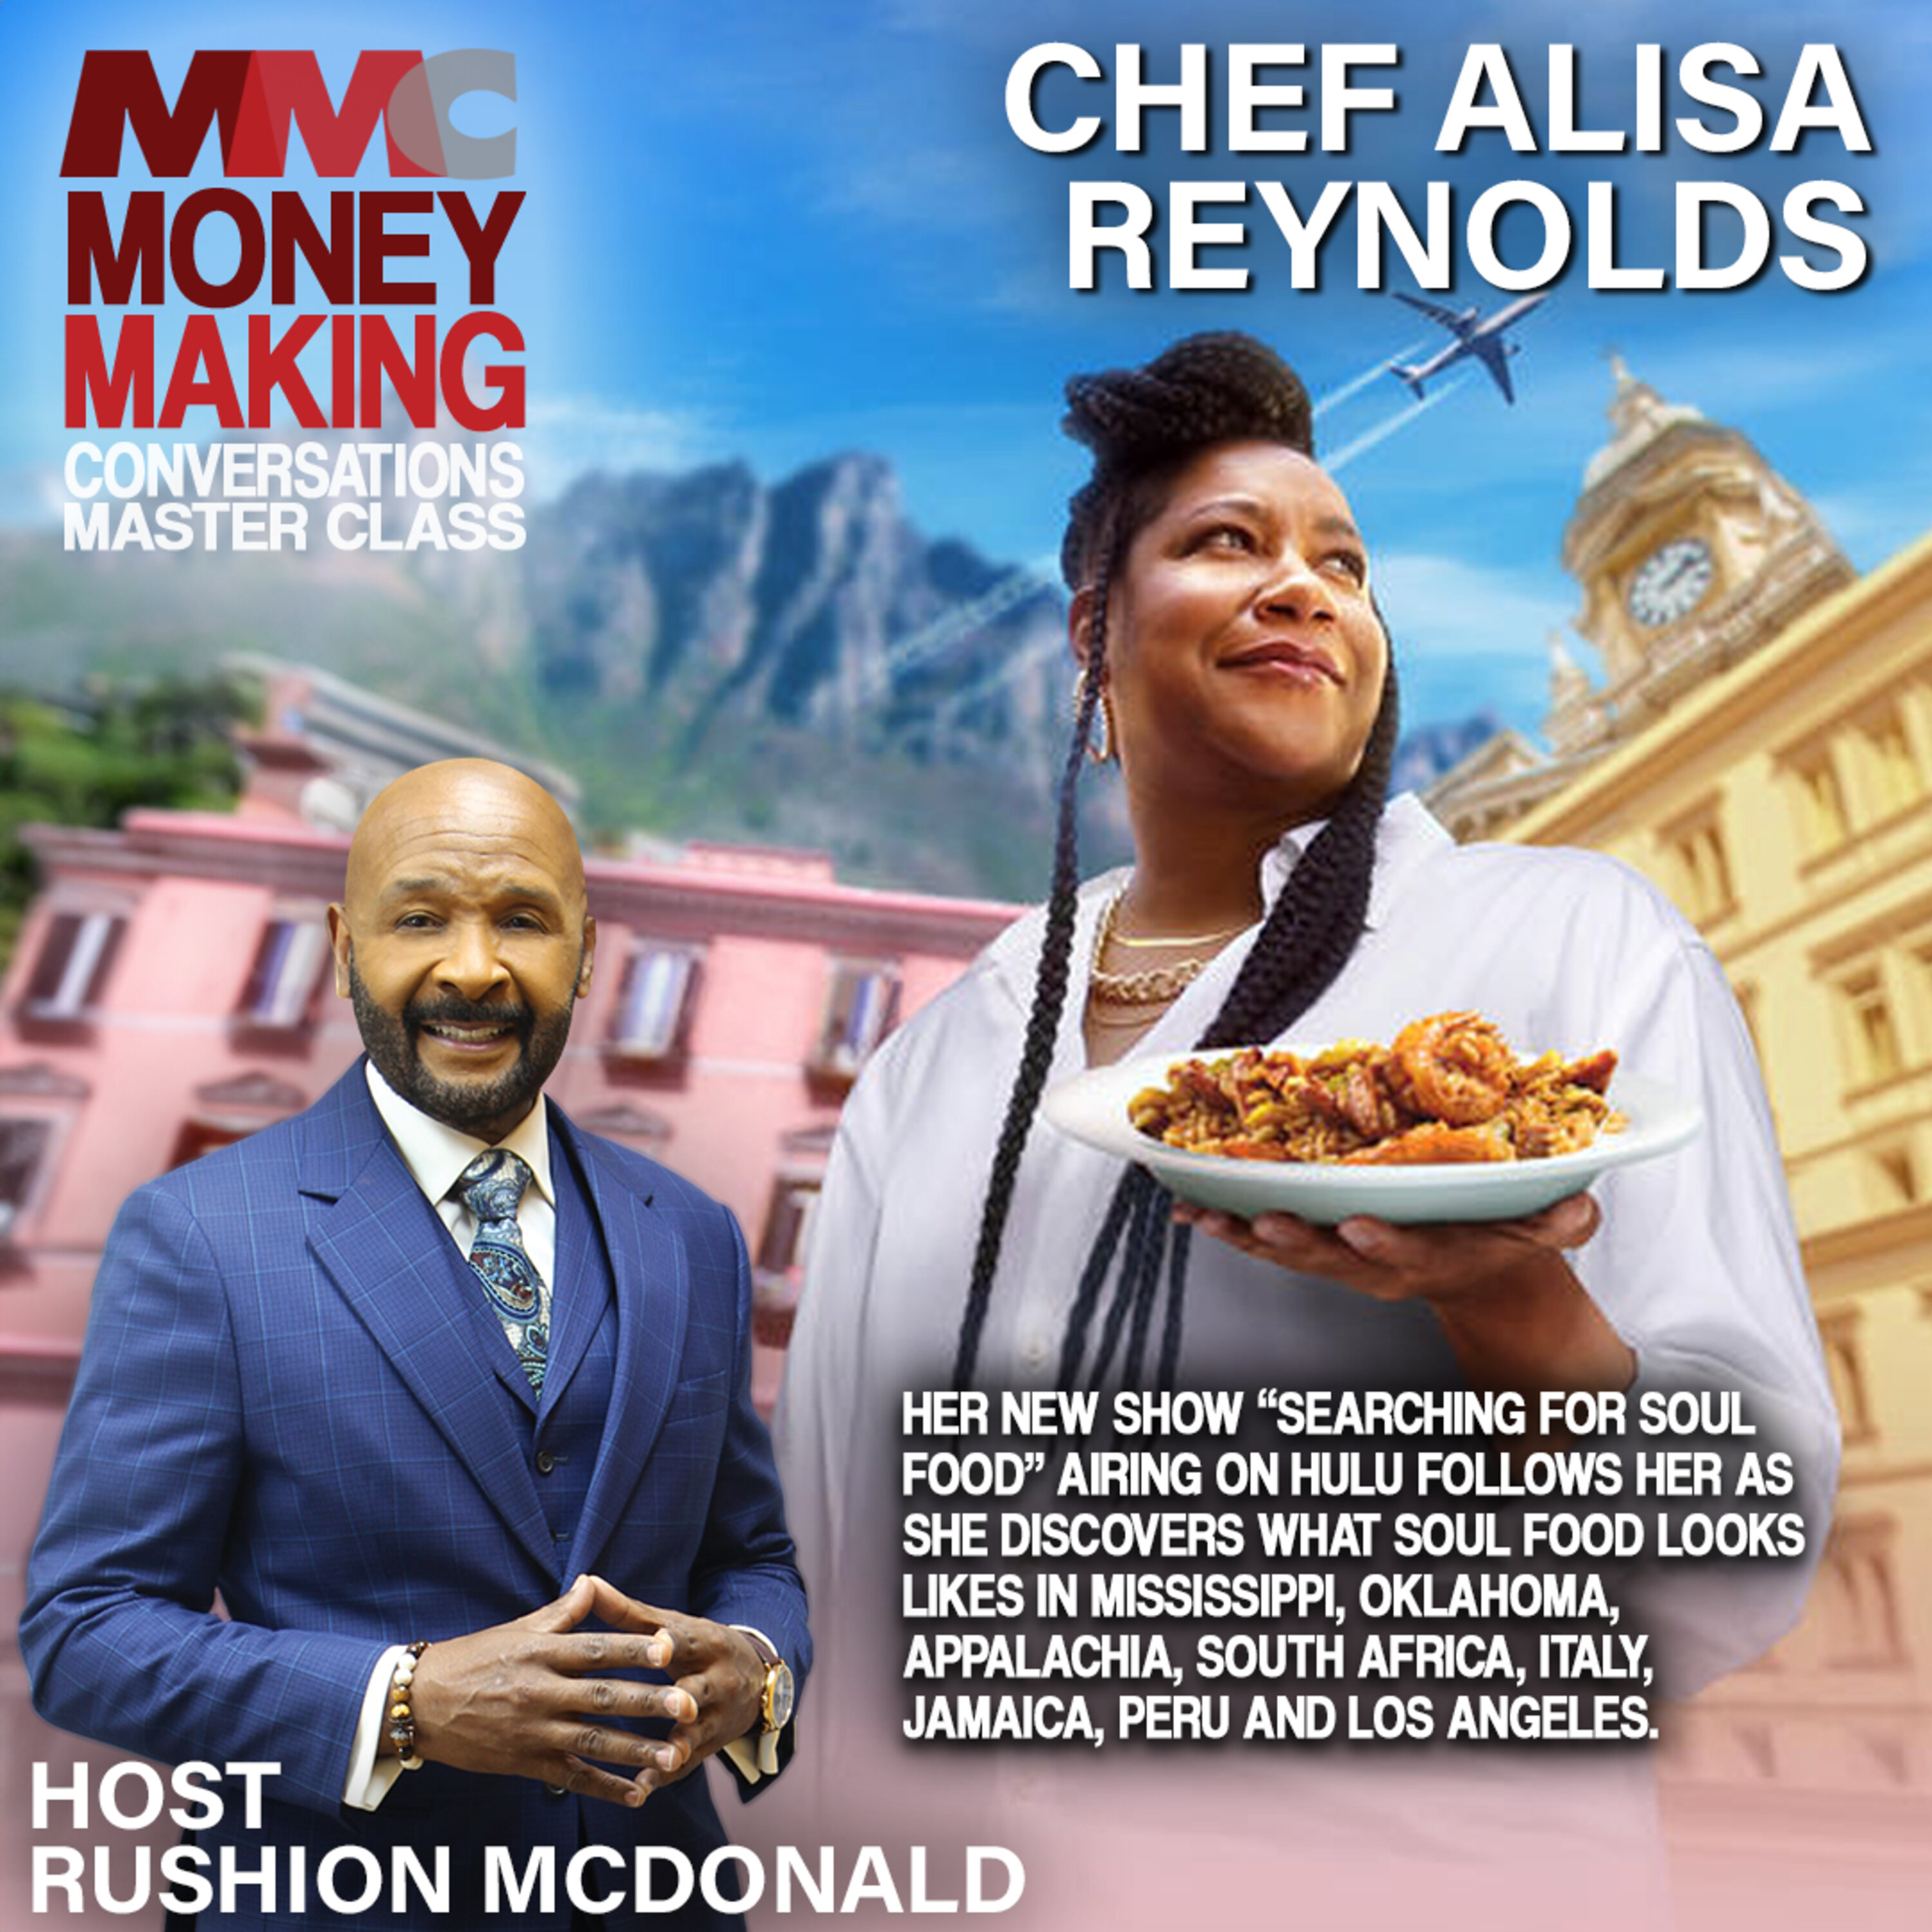 Rushion interviews Chef Alisa Reynolds.  Her show “Searching For Soul Food” on Hulu follows her as she discovers what soul food looks like in Mississippi, Oklahoma, Appalachia, South Africa, Italy, Jamaica, Peru, and Los Angeles.